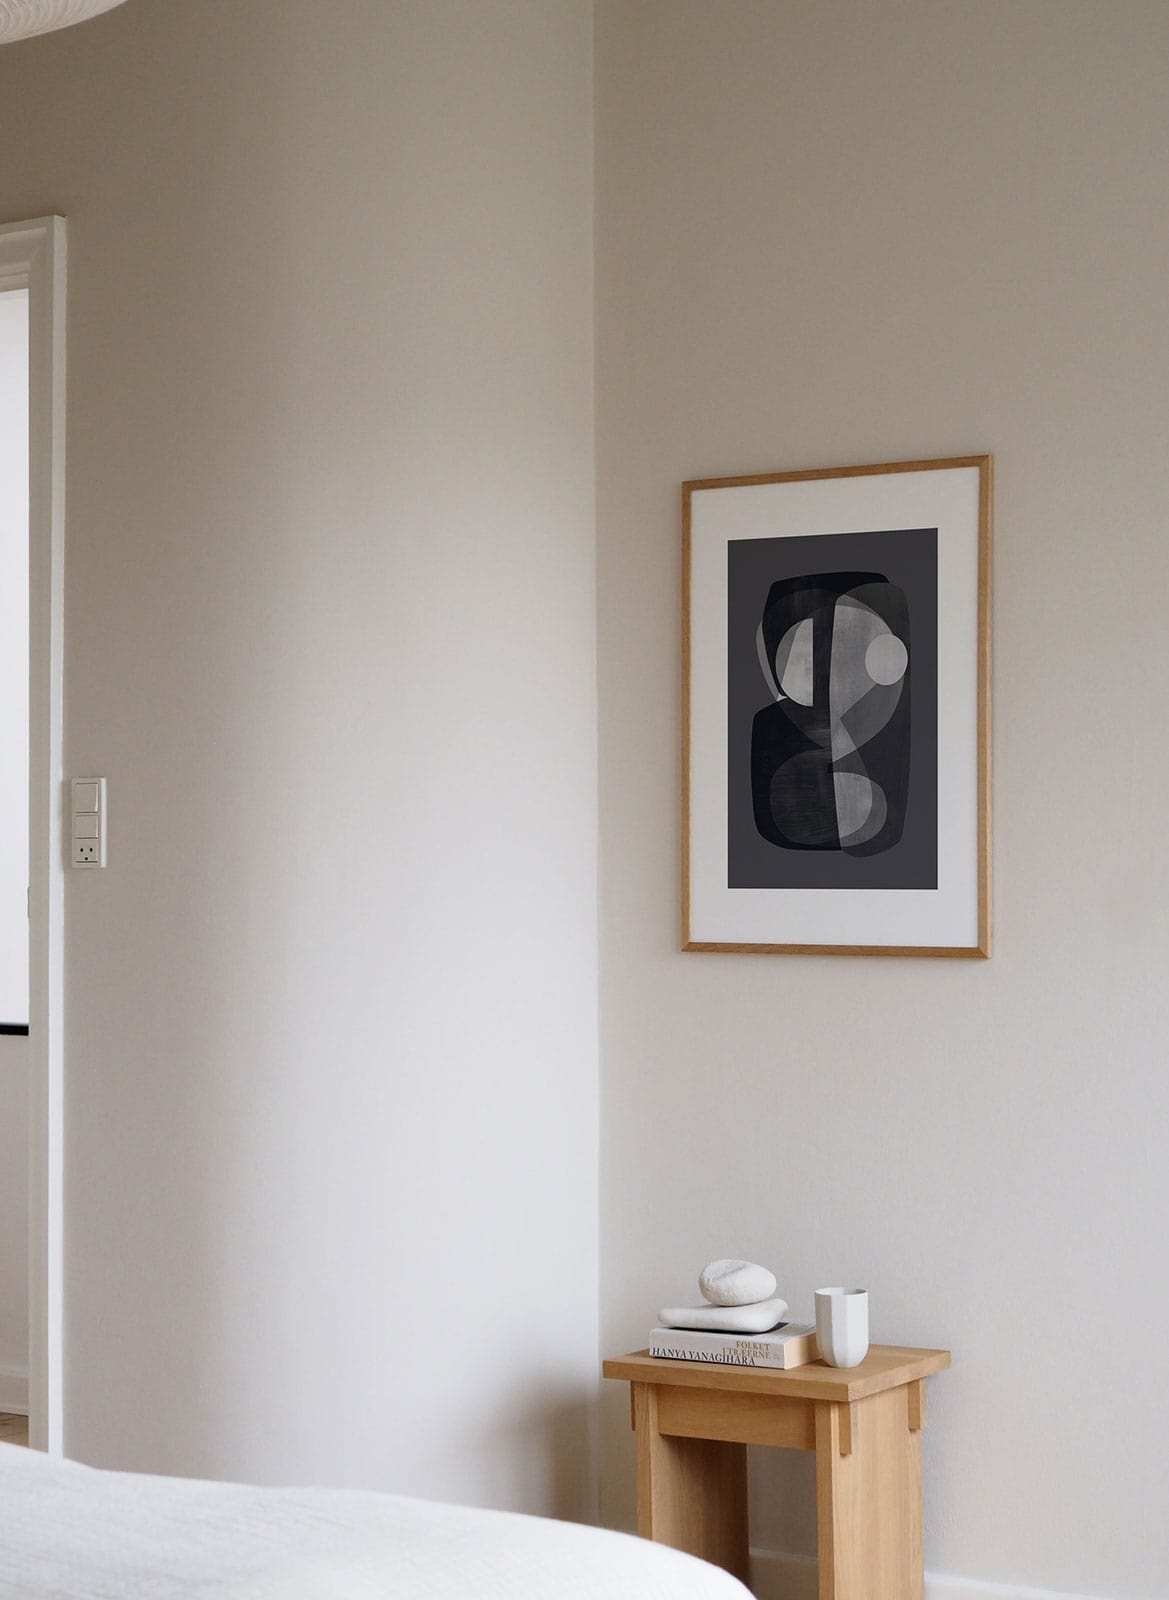 Framed grey abstract posters hanging above a table by Atelier Cph